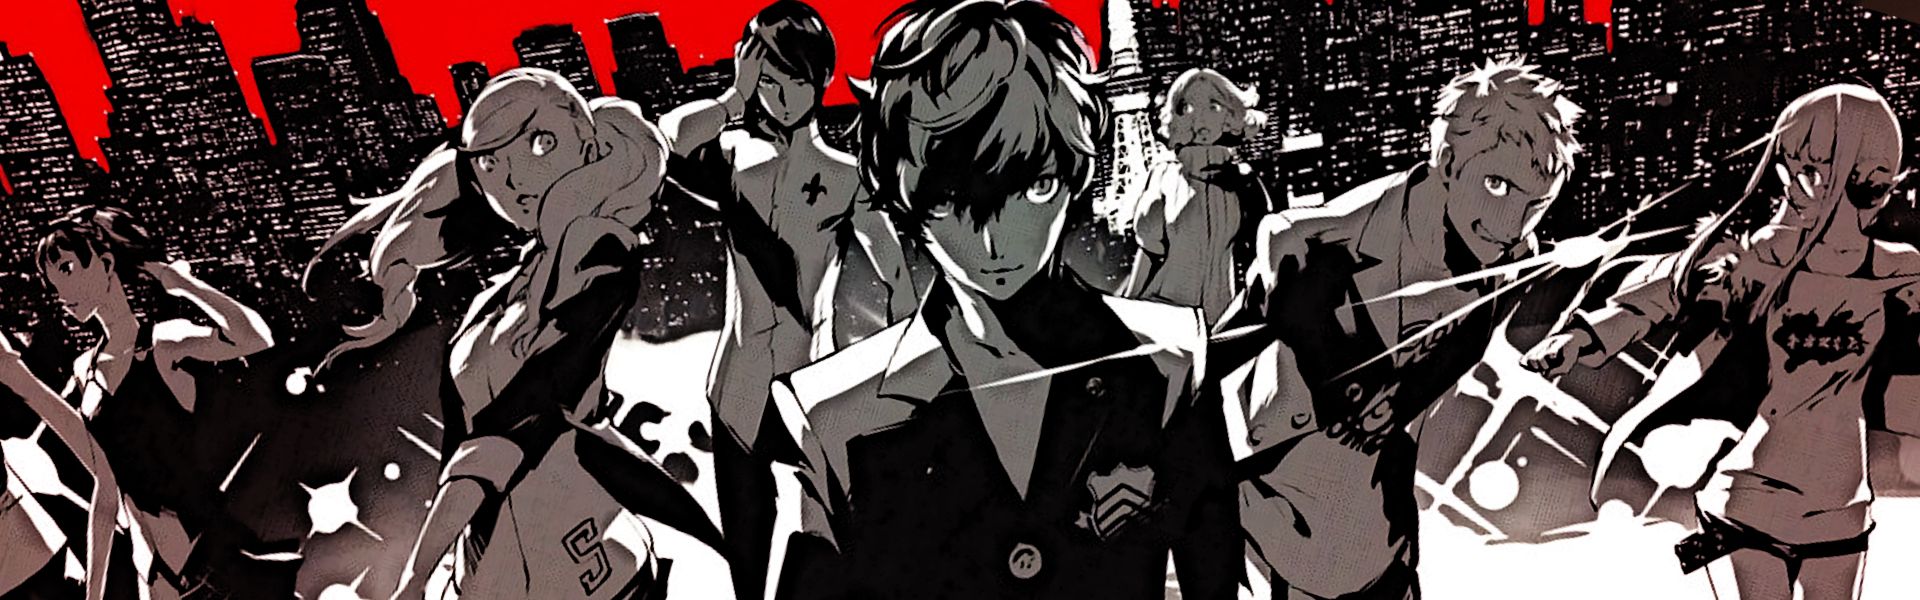 New Persona Details On Anime, Dancing Spin Offs, PS4 Port & More